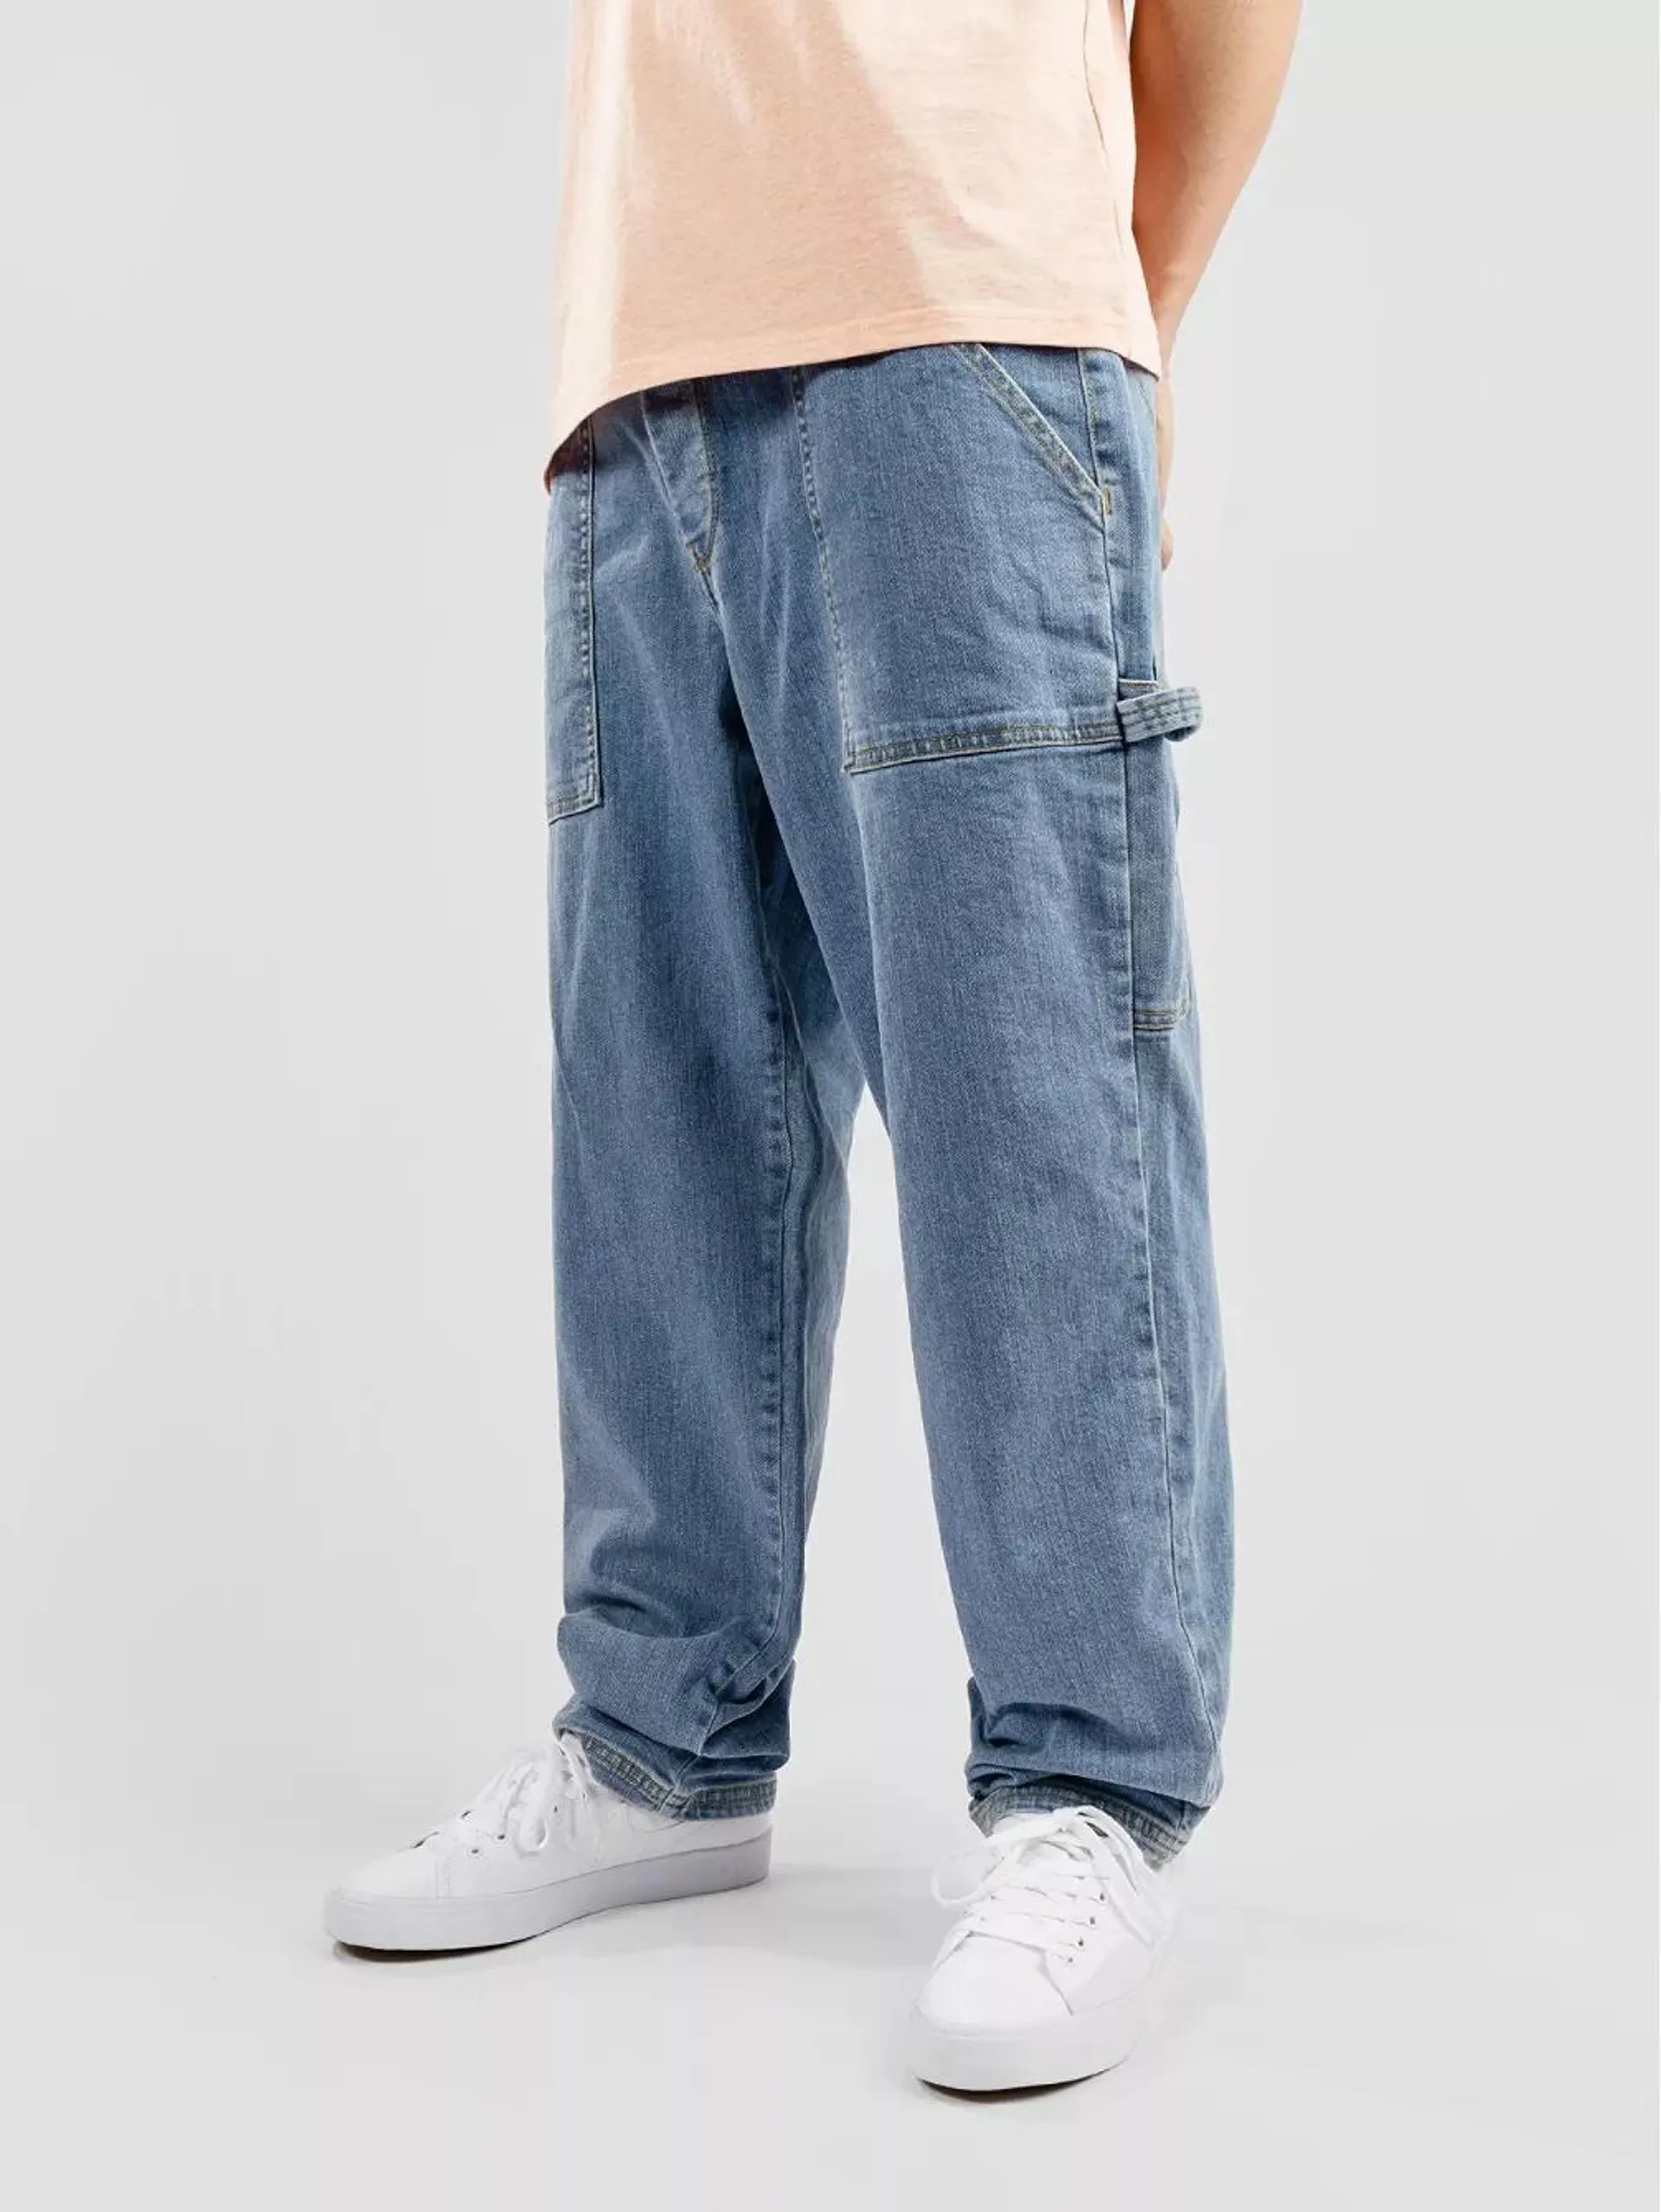 Homeboy X-Tra Work Jeans